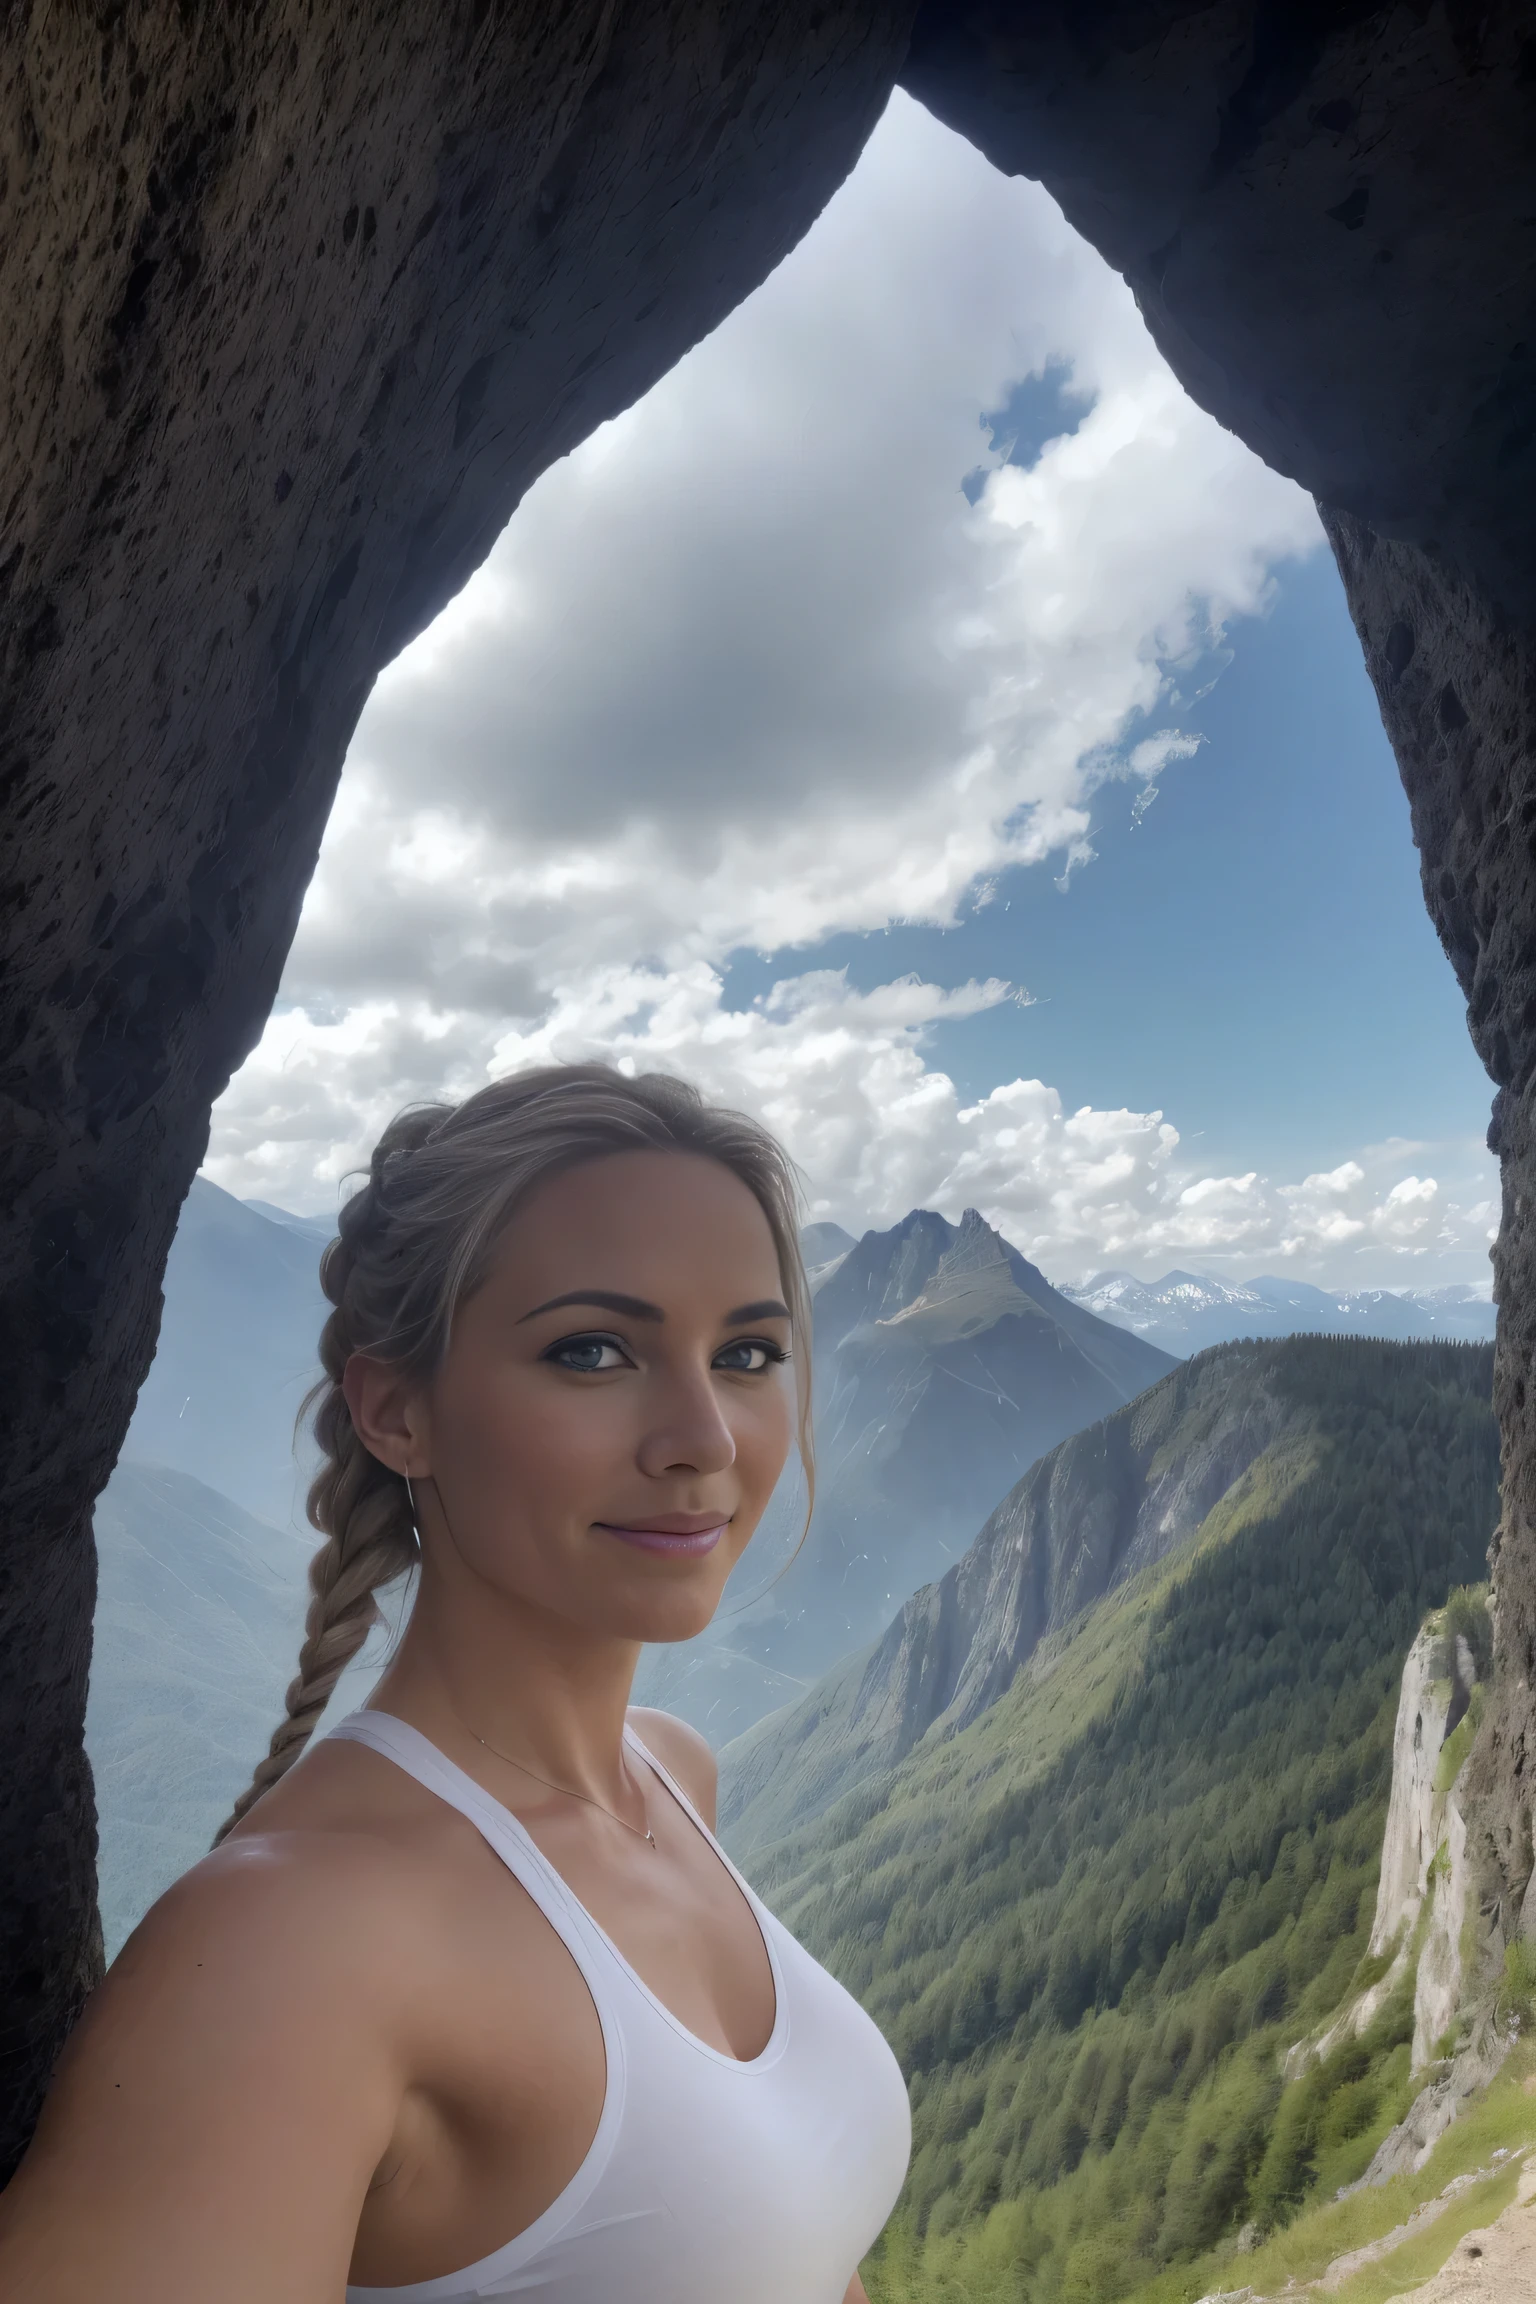 SPIRIT, analogue, Nikon Z 85mm, award-winning glamor photo,((best quality)), ((​masterpiece)), ((realisti)), hiking, bouldern, piercing eyes, peru, very happy, blond hair, Quad braids, Lanfschaft in peru, Natural landscape photography; Rockclimbing; (1woman:1.3, alone), (Cowboy-shot:1.3), (white t-shirts, Trekkingshorts, Trekking boot), Hiking along a mountain road, Bumpy road, Boulders), (high ponytail), (The face shines:0.8), (smiling:0.8), (selfee, Taking photos with a wide-angle lens), (Spectacular mountain views in summer, with rugged Peruvian mountain ranges in the distance, and the wonderful contrast of blue sky and white clouds), (highest quality, hyper-realistic:1.3, Super tight, very detailed representation, best image quality, very detailed representation)